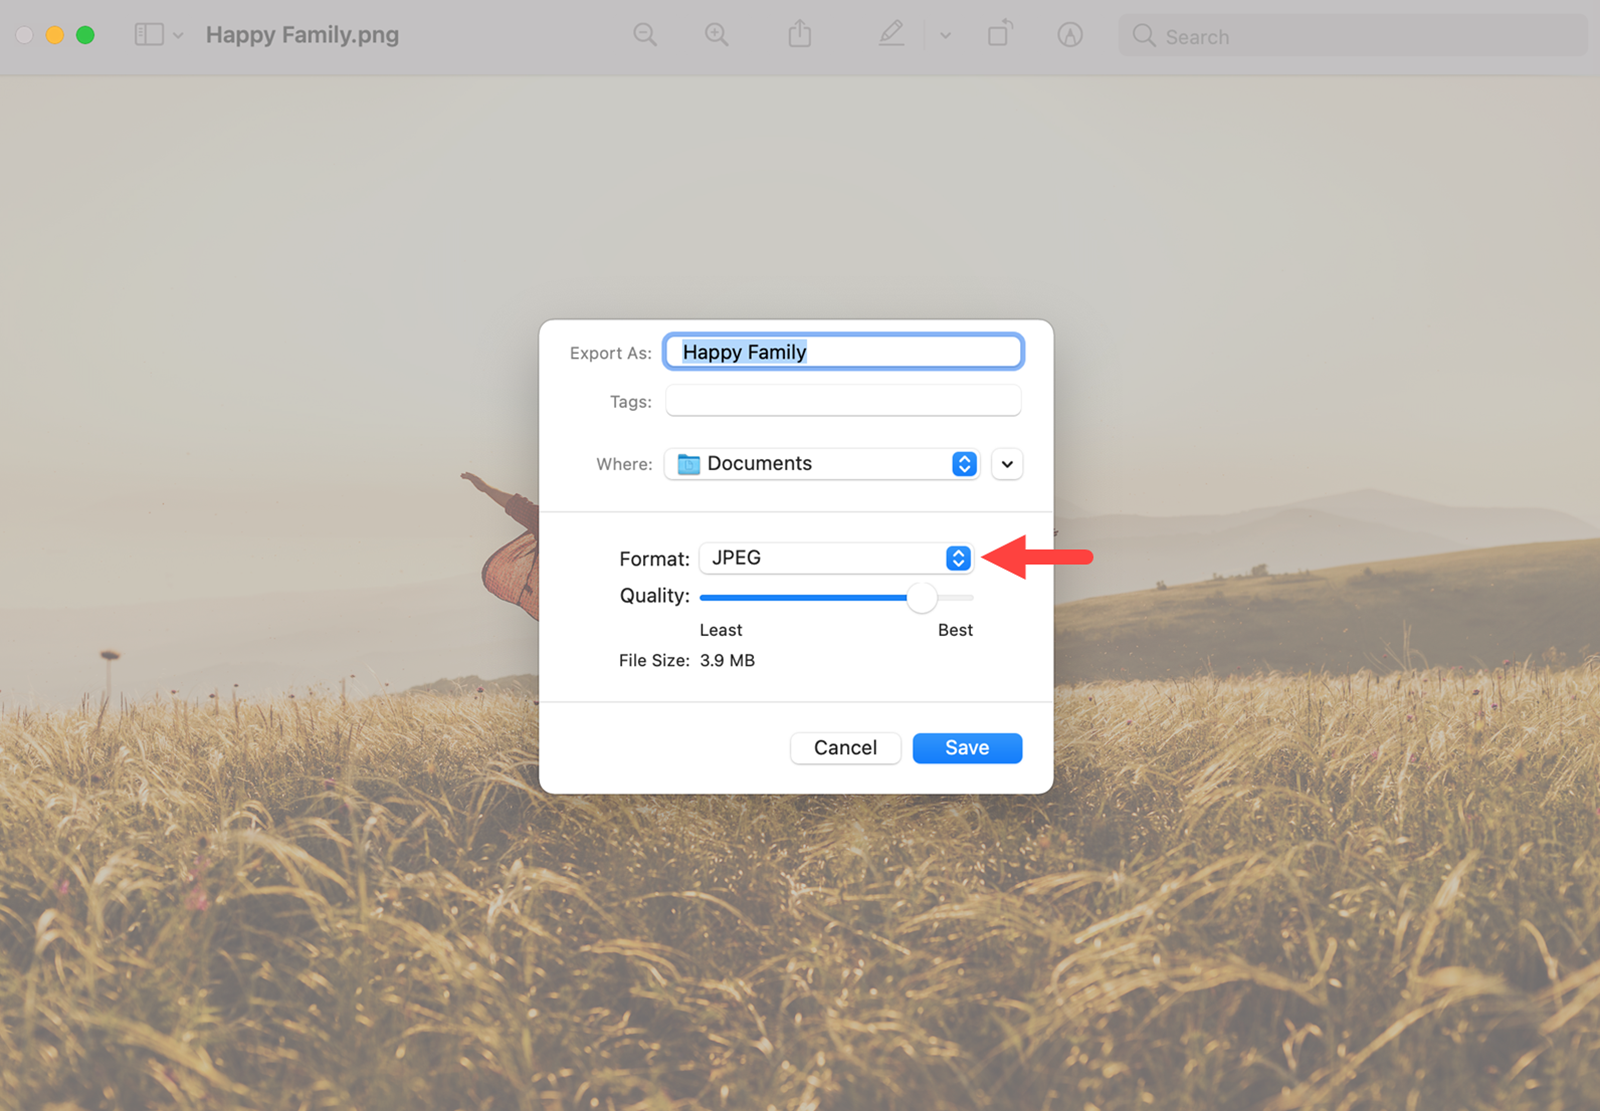 Apple Preview "Export As.." options to convert PNG image file to JPG format